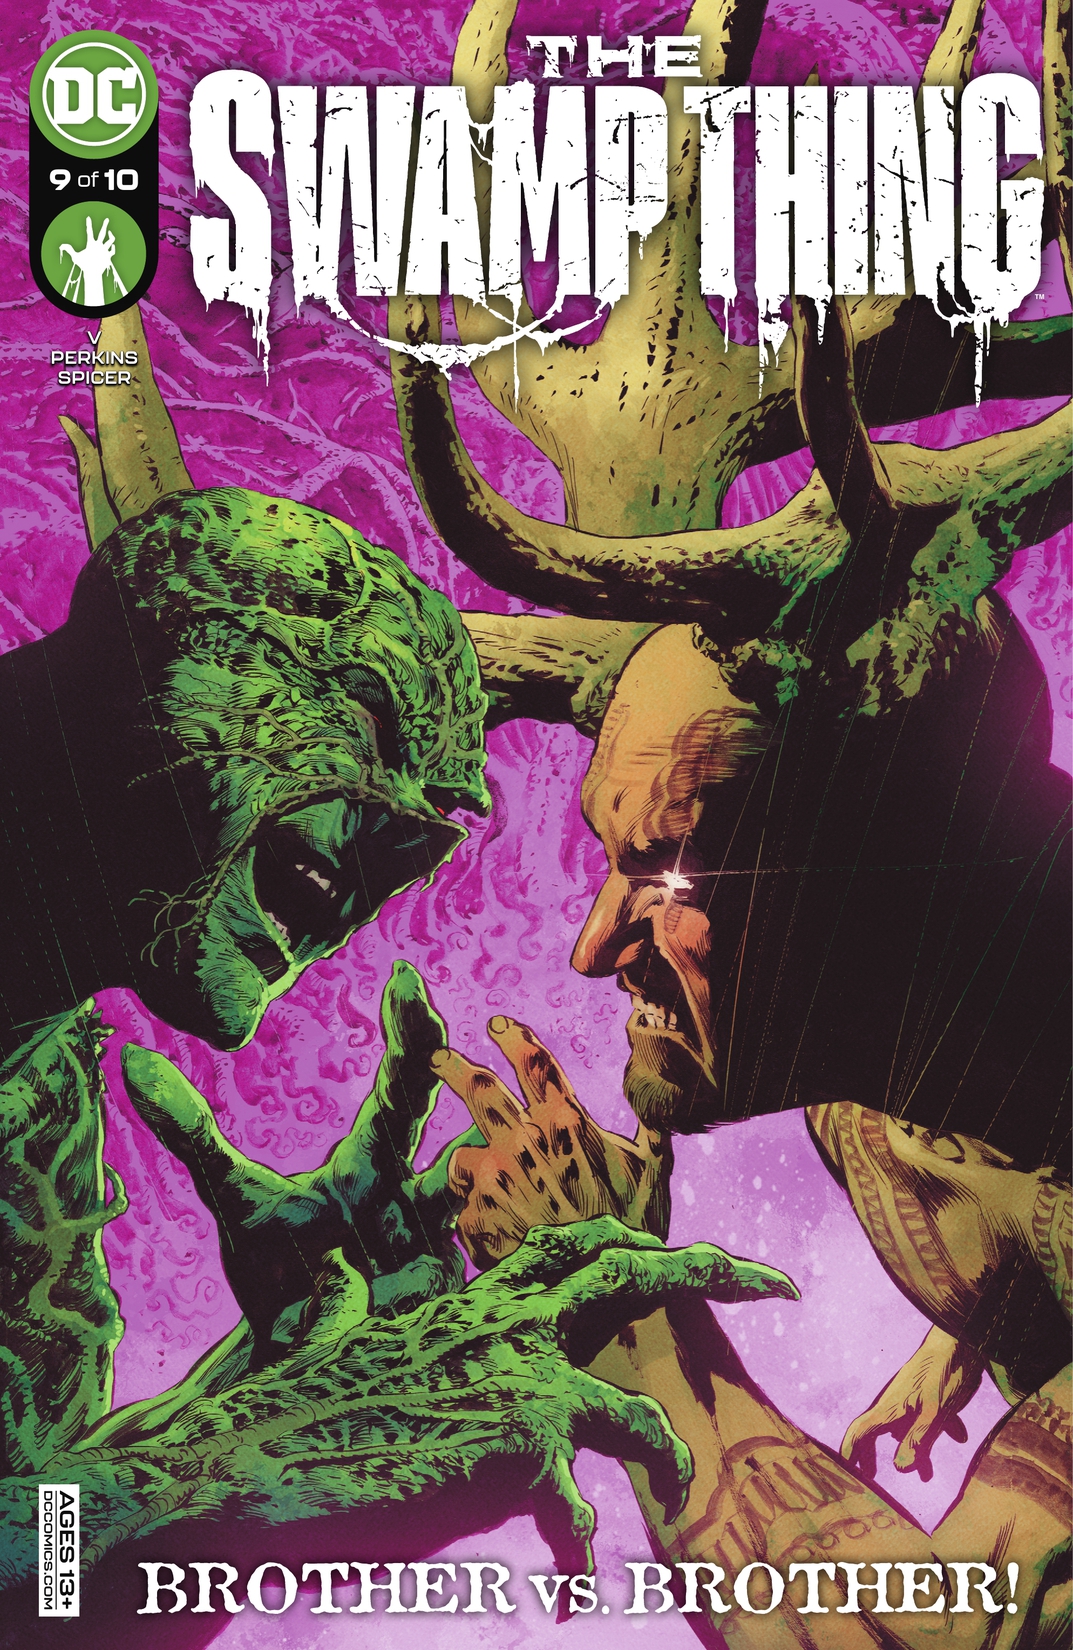 The Swamp Thing #9 preview images